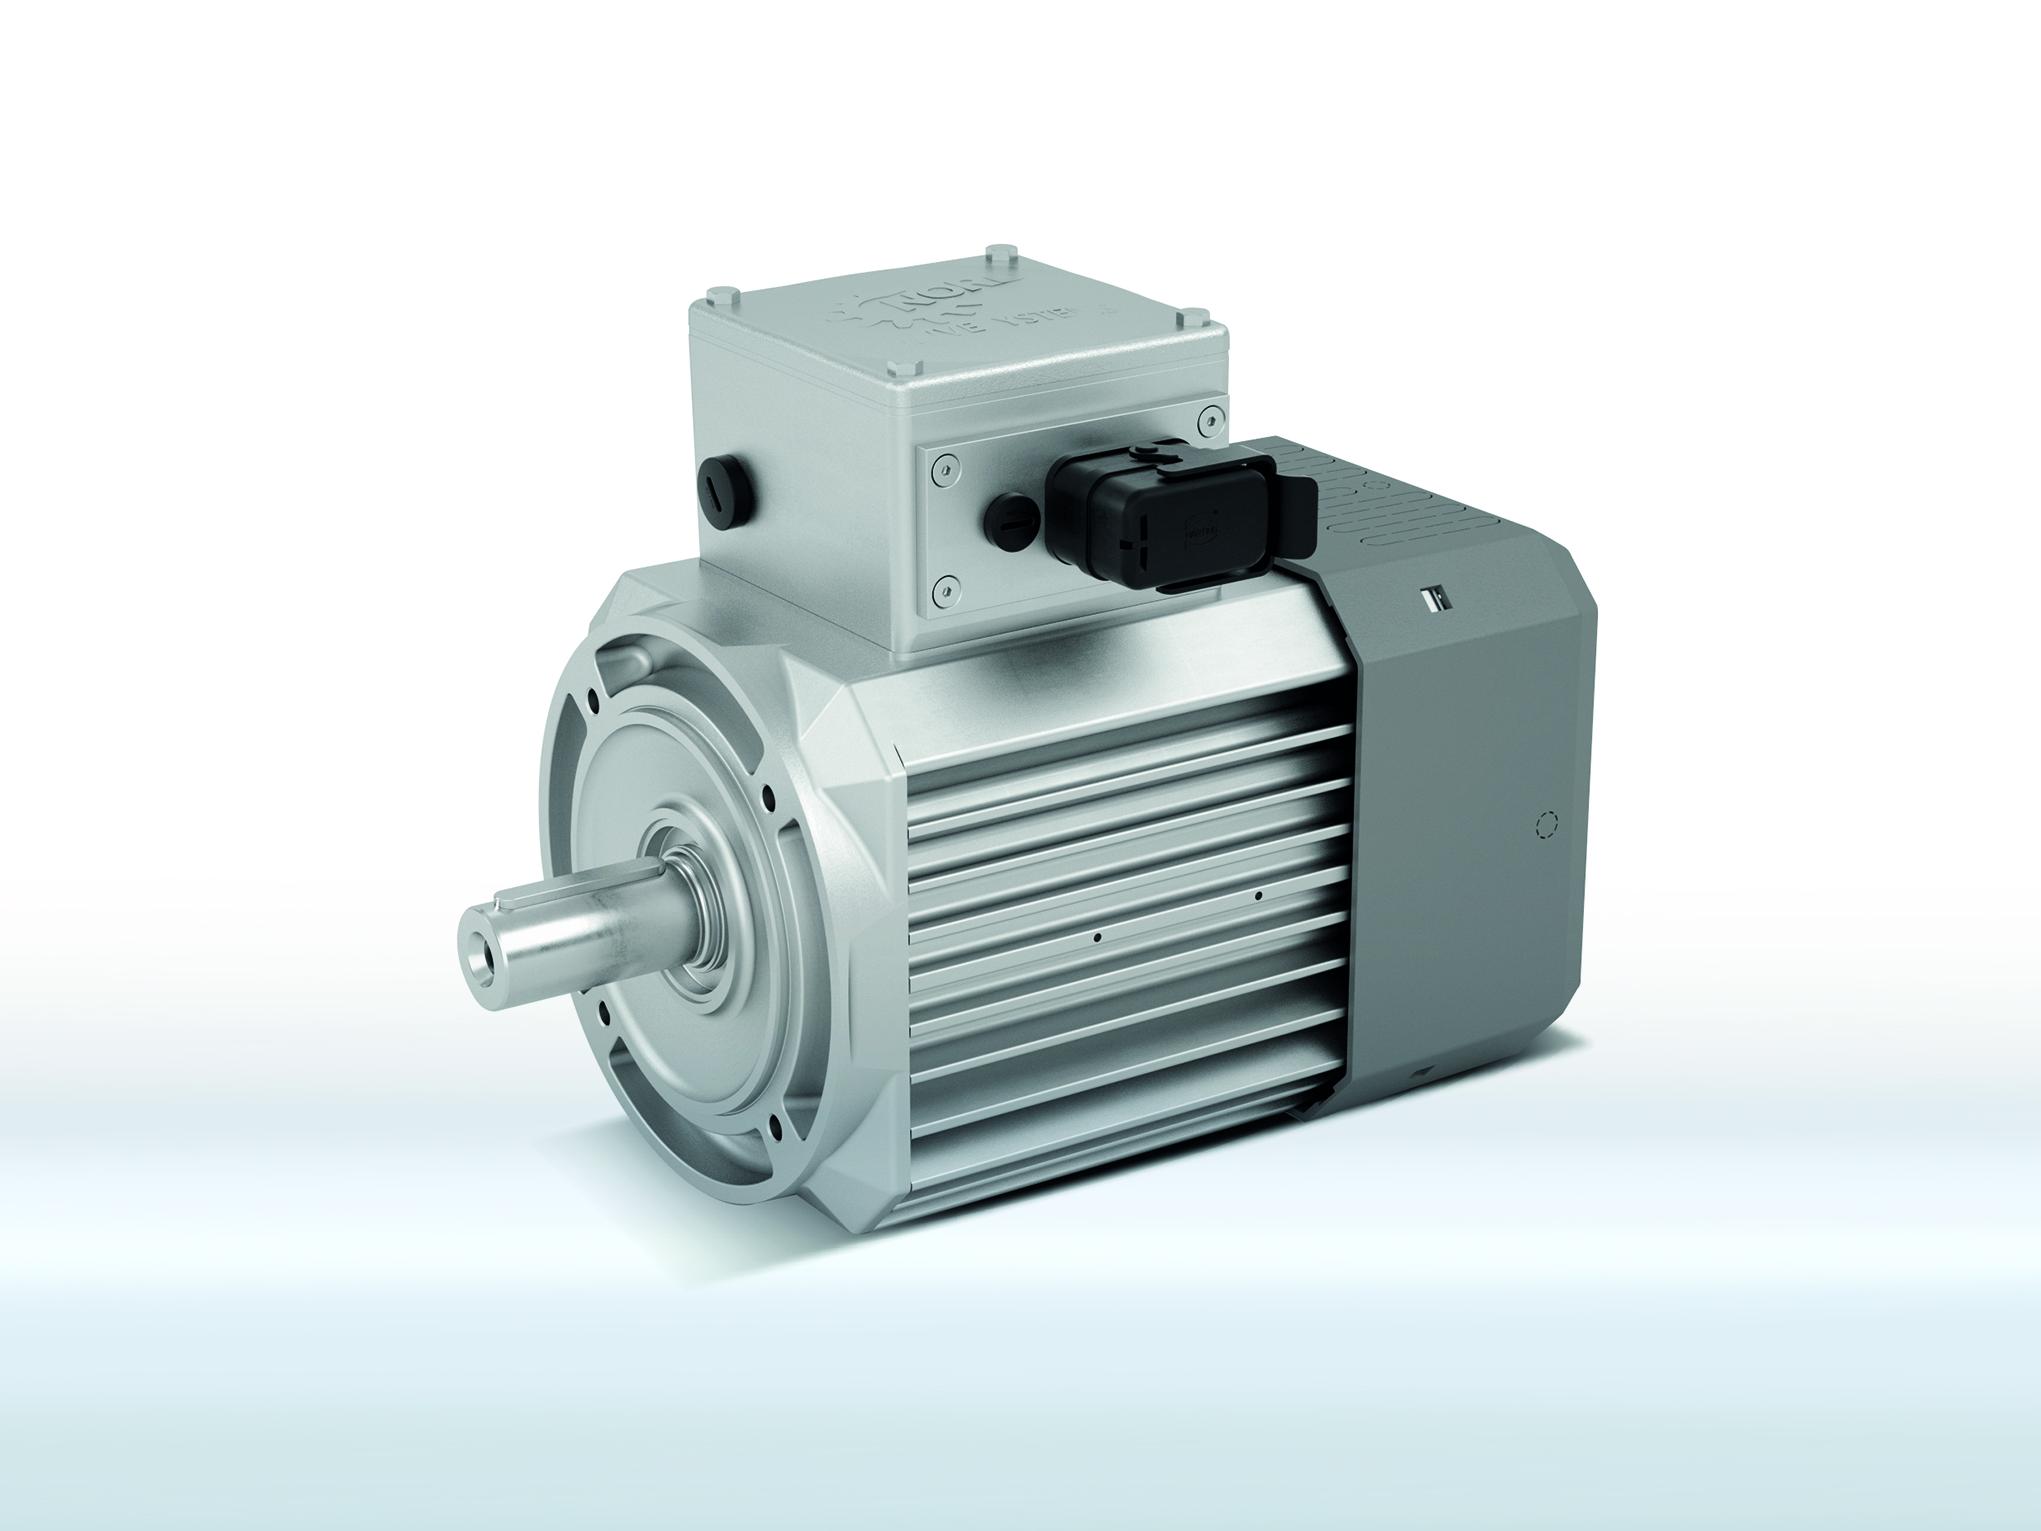 Synchronous motors aim to set new standards

